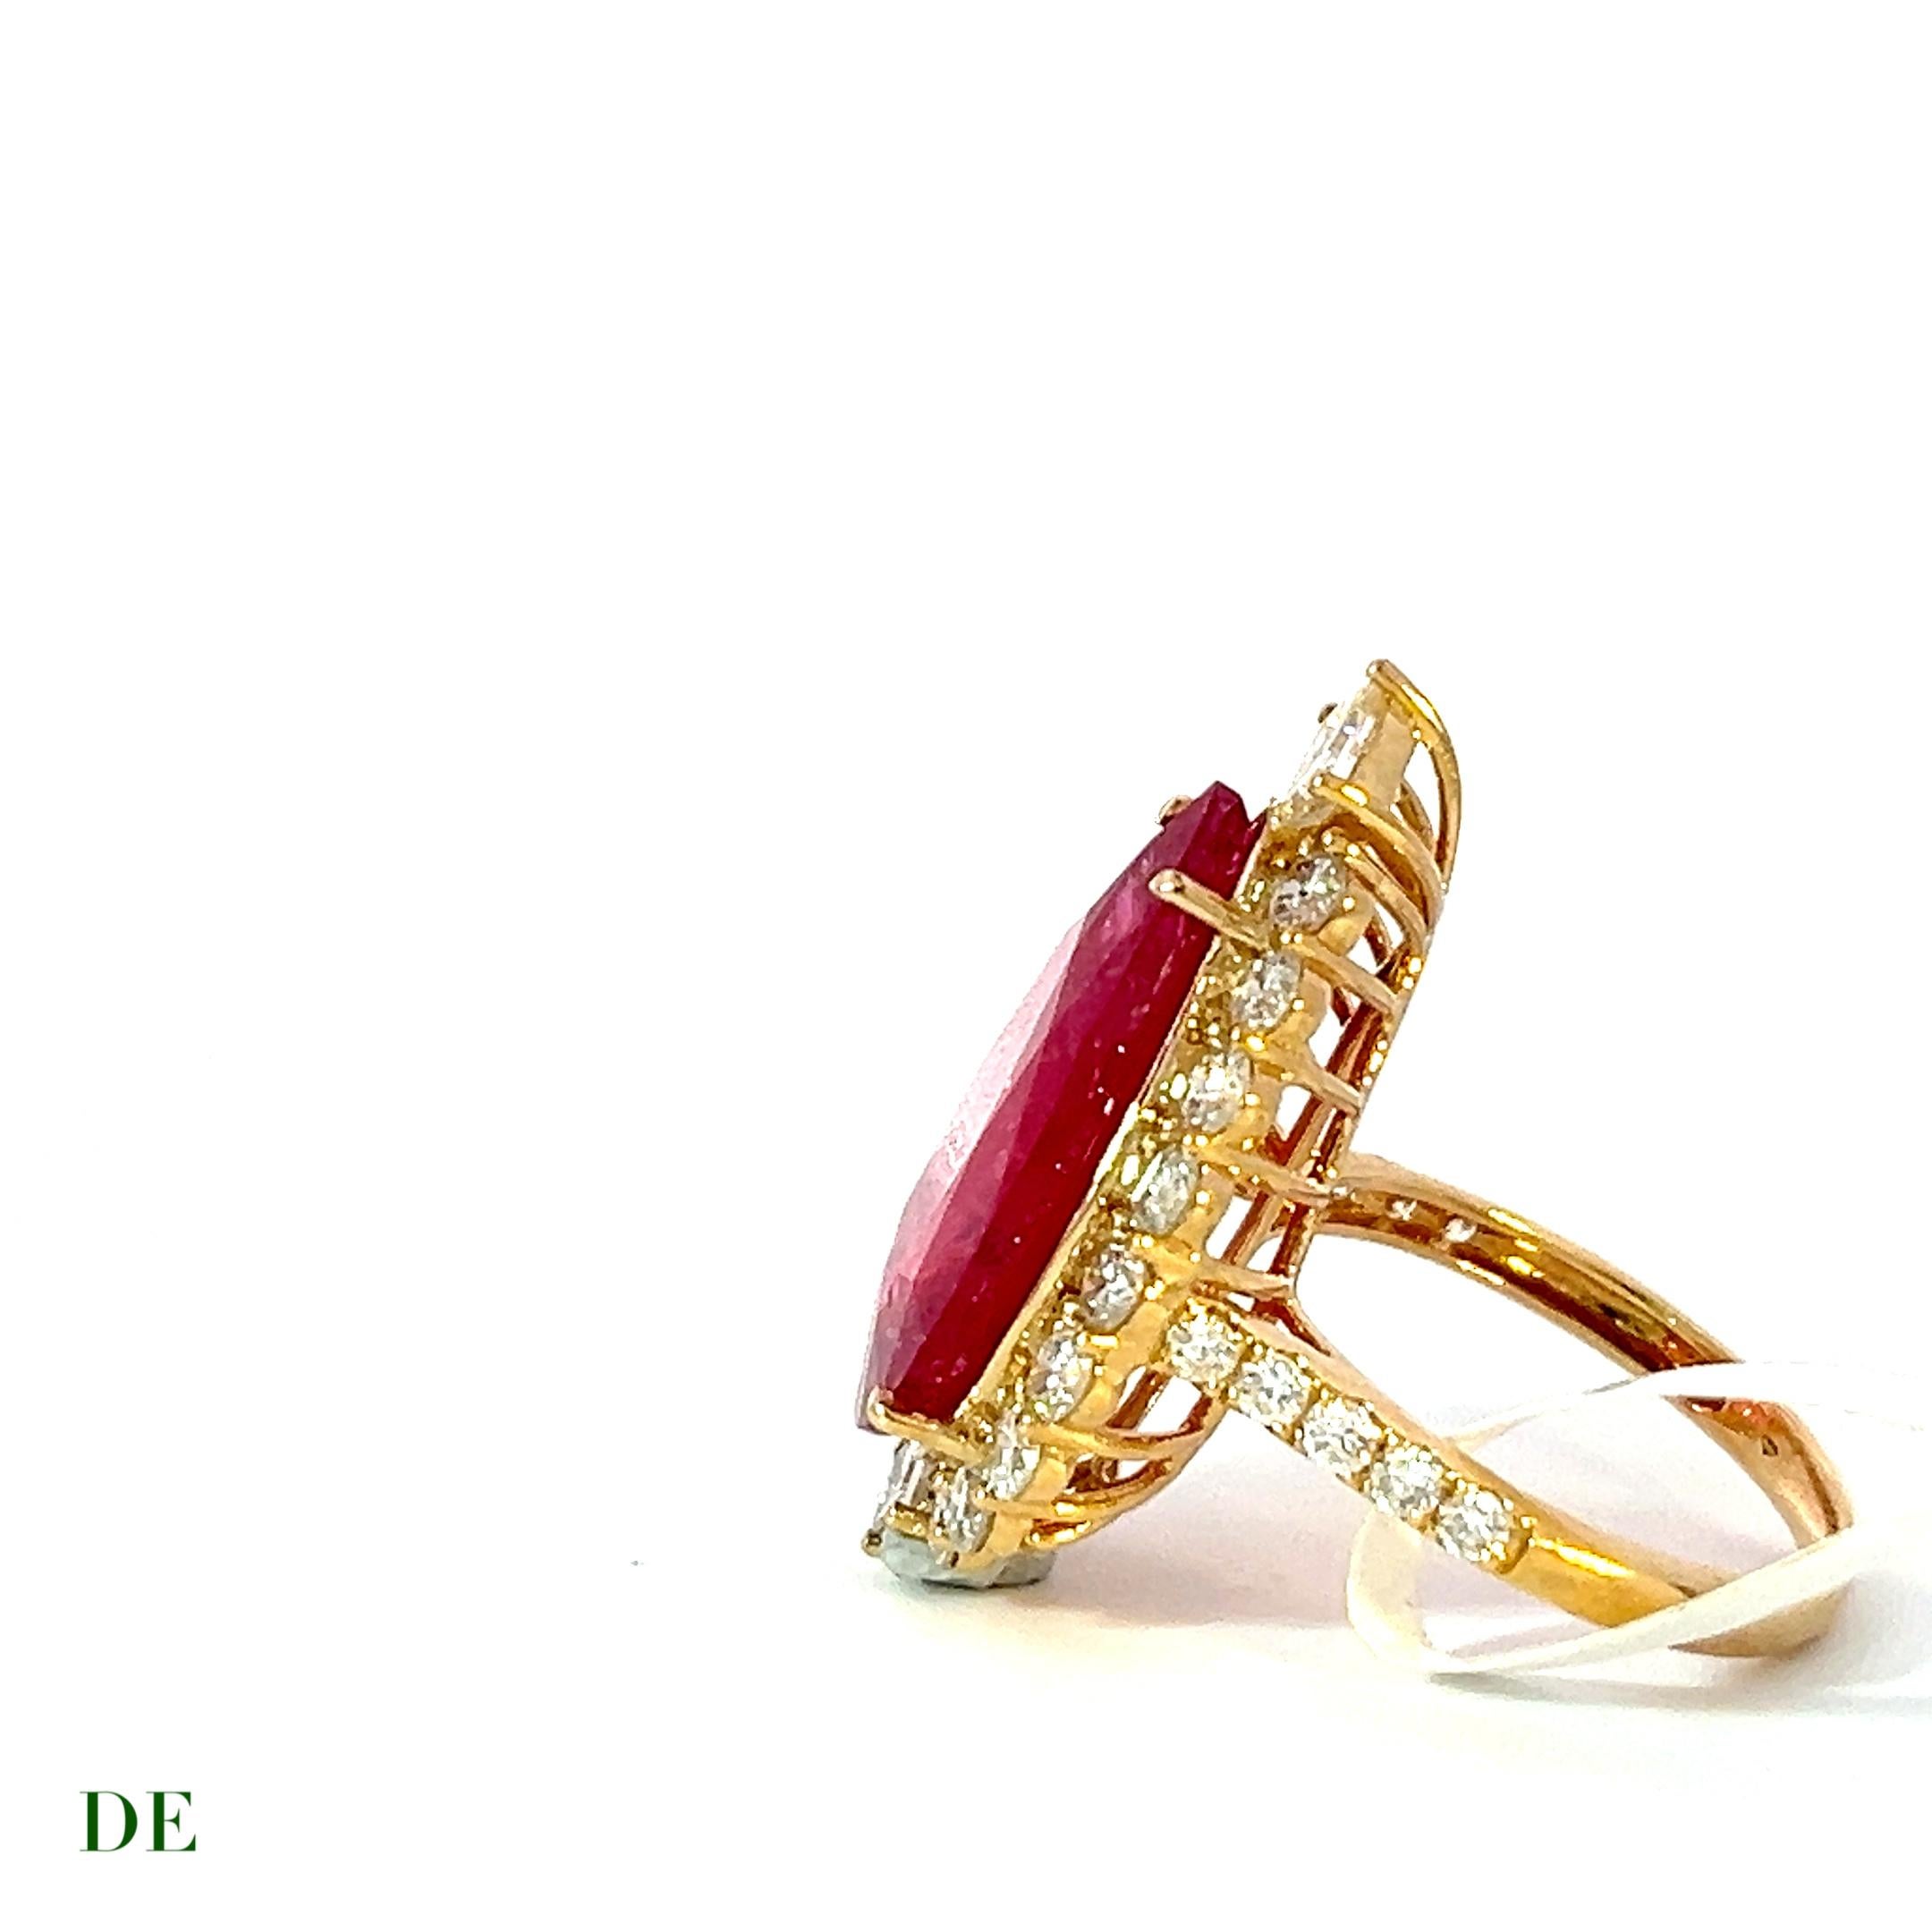 Rare 14k 10.29ct Pear Vivid Red Rubellite with 2.79ct Statement Diamond Ring In New Condition For Sale In kowloon, Kowloon